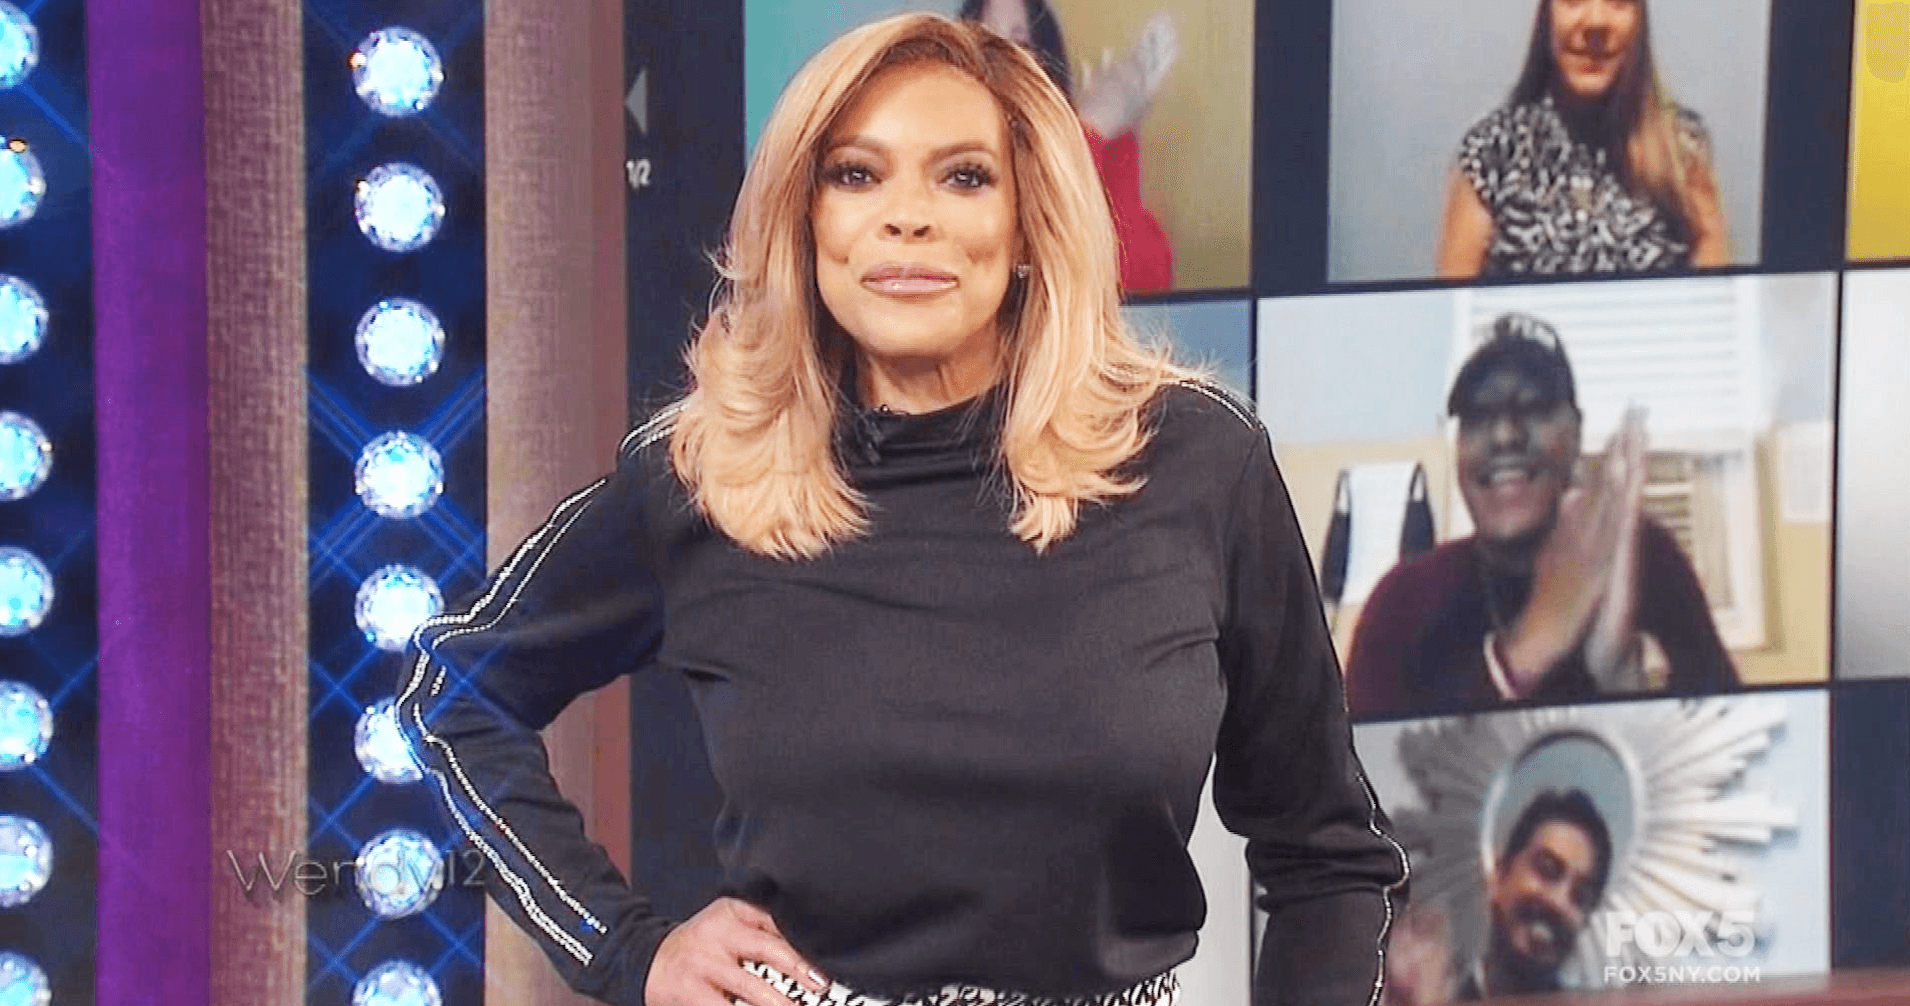 Wendy Williams CLAPS BACK At Fans Who Accused Her Of Looking High On Live TV!